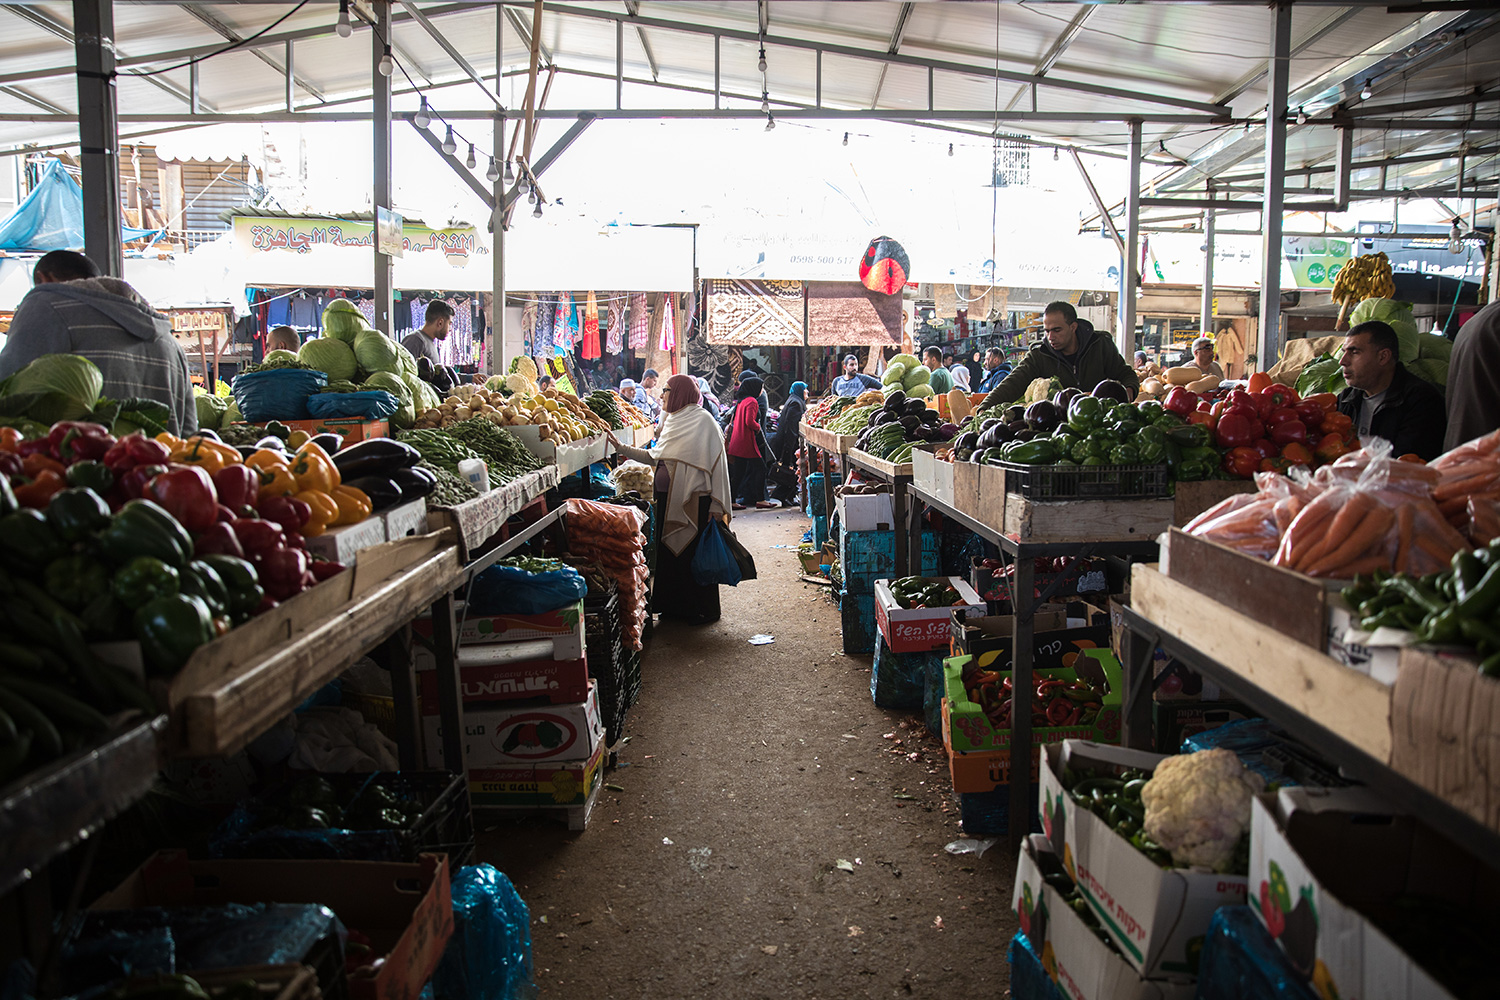 Image of outdoor produce market